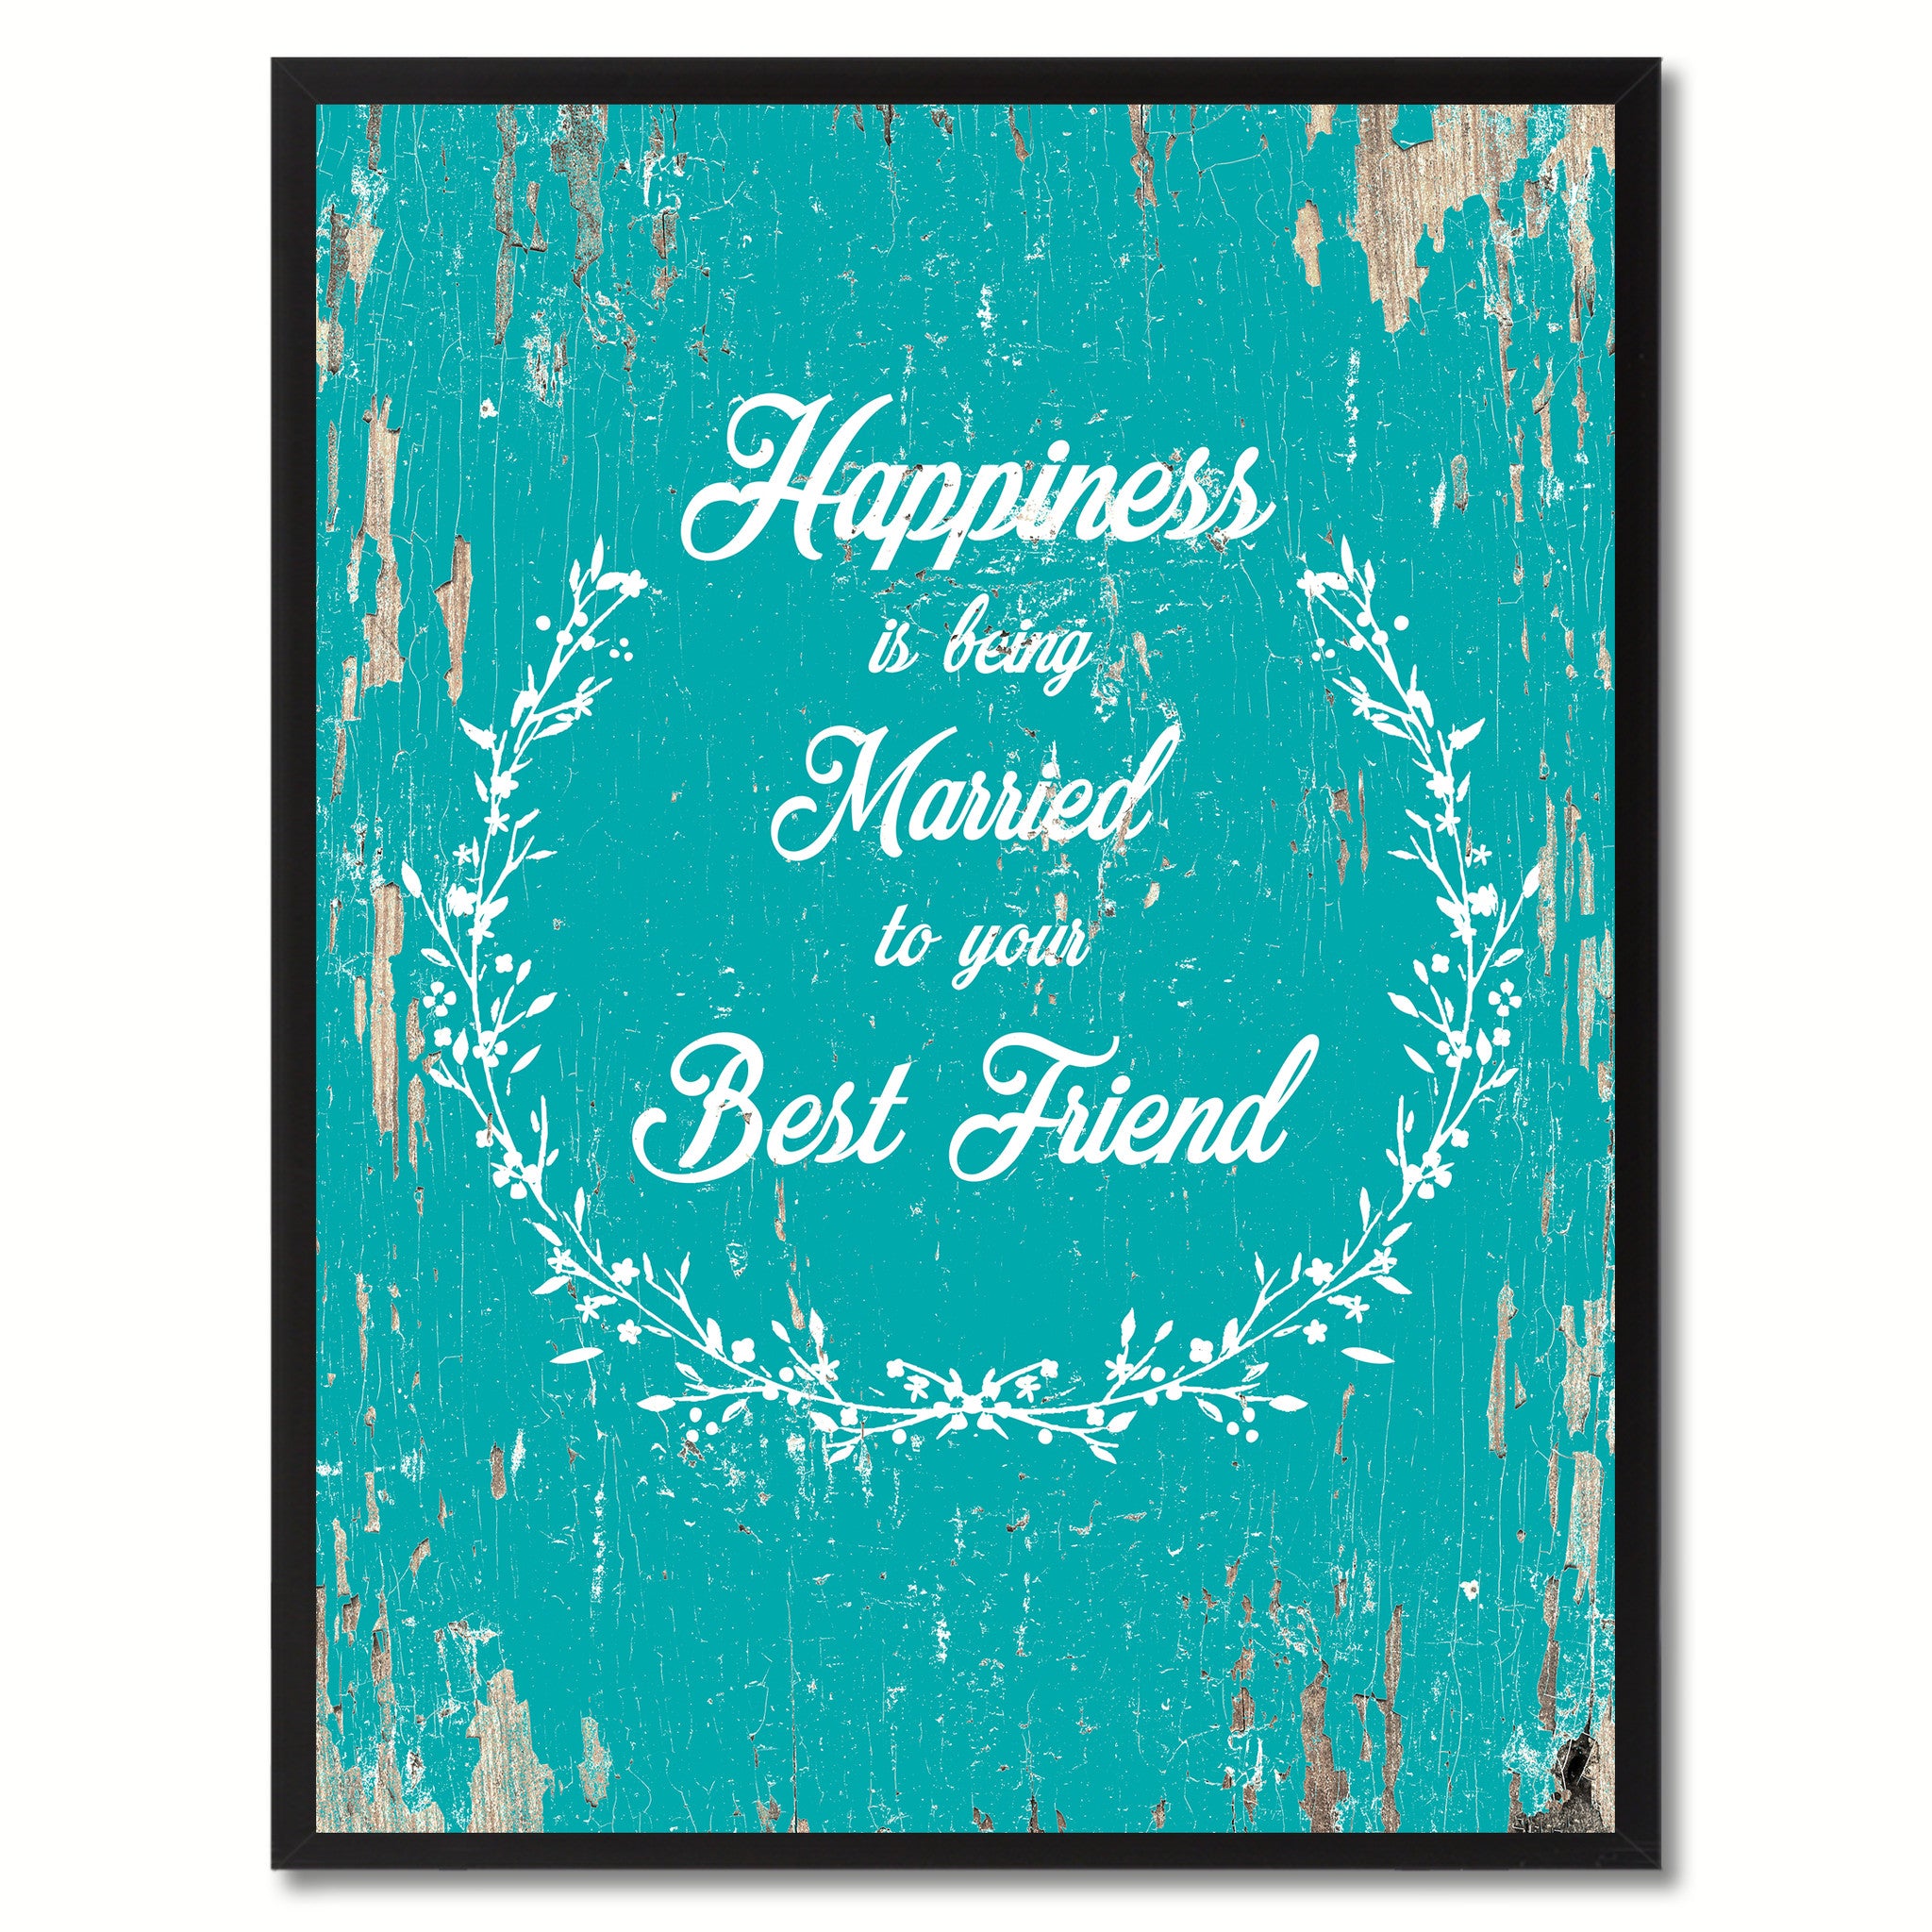 Happiness is being married to your best friend Inspirational Quote Saying Gift Ideas Home Decor Wall Art